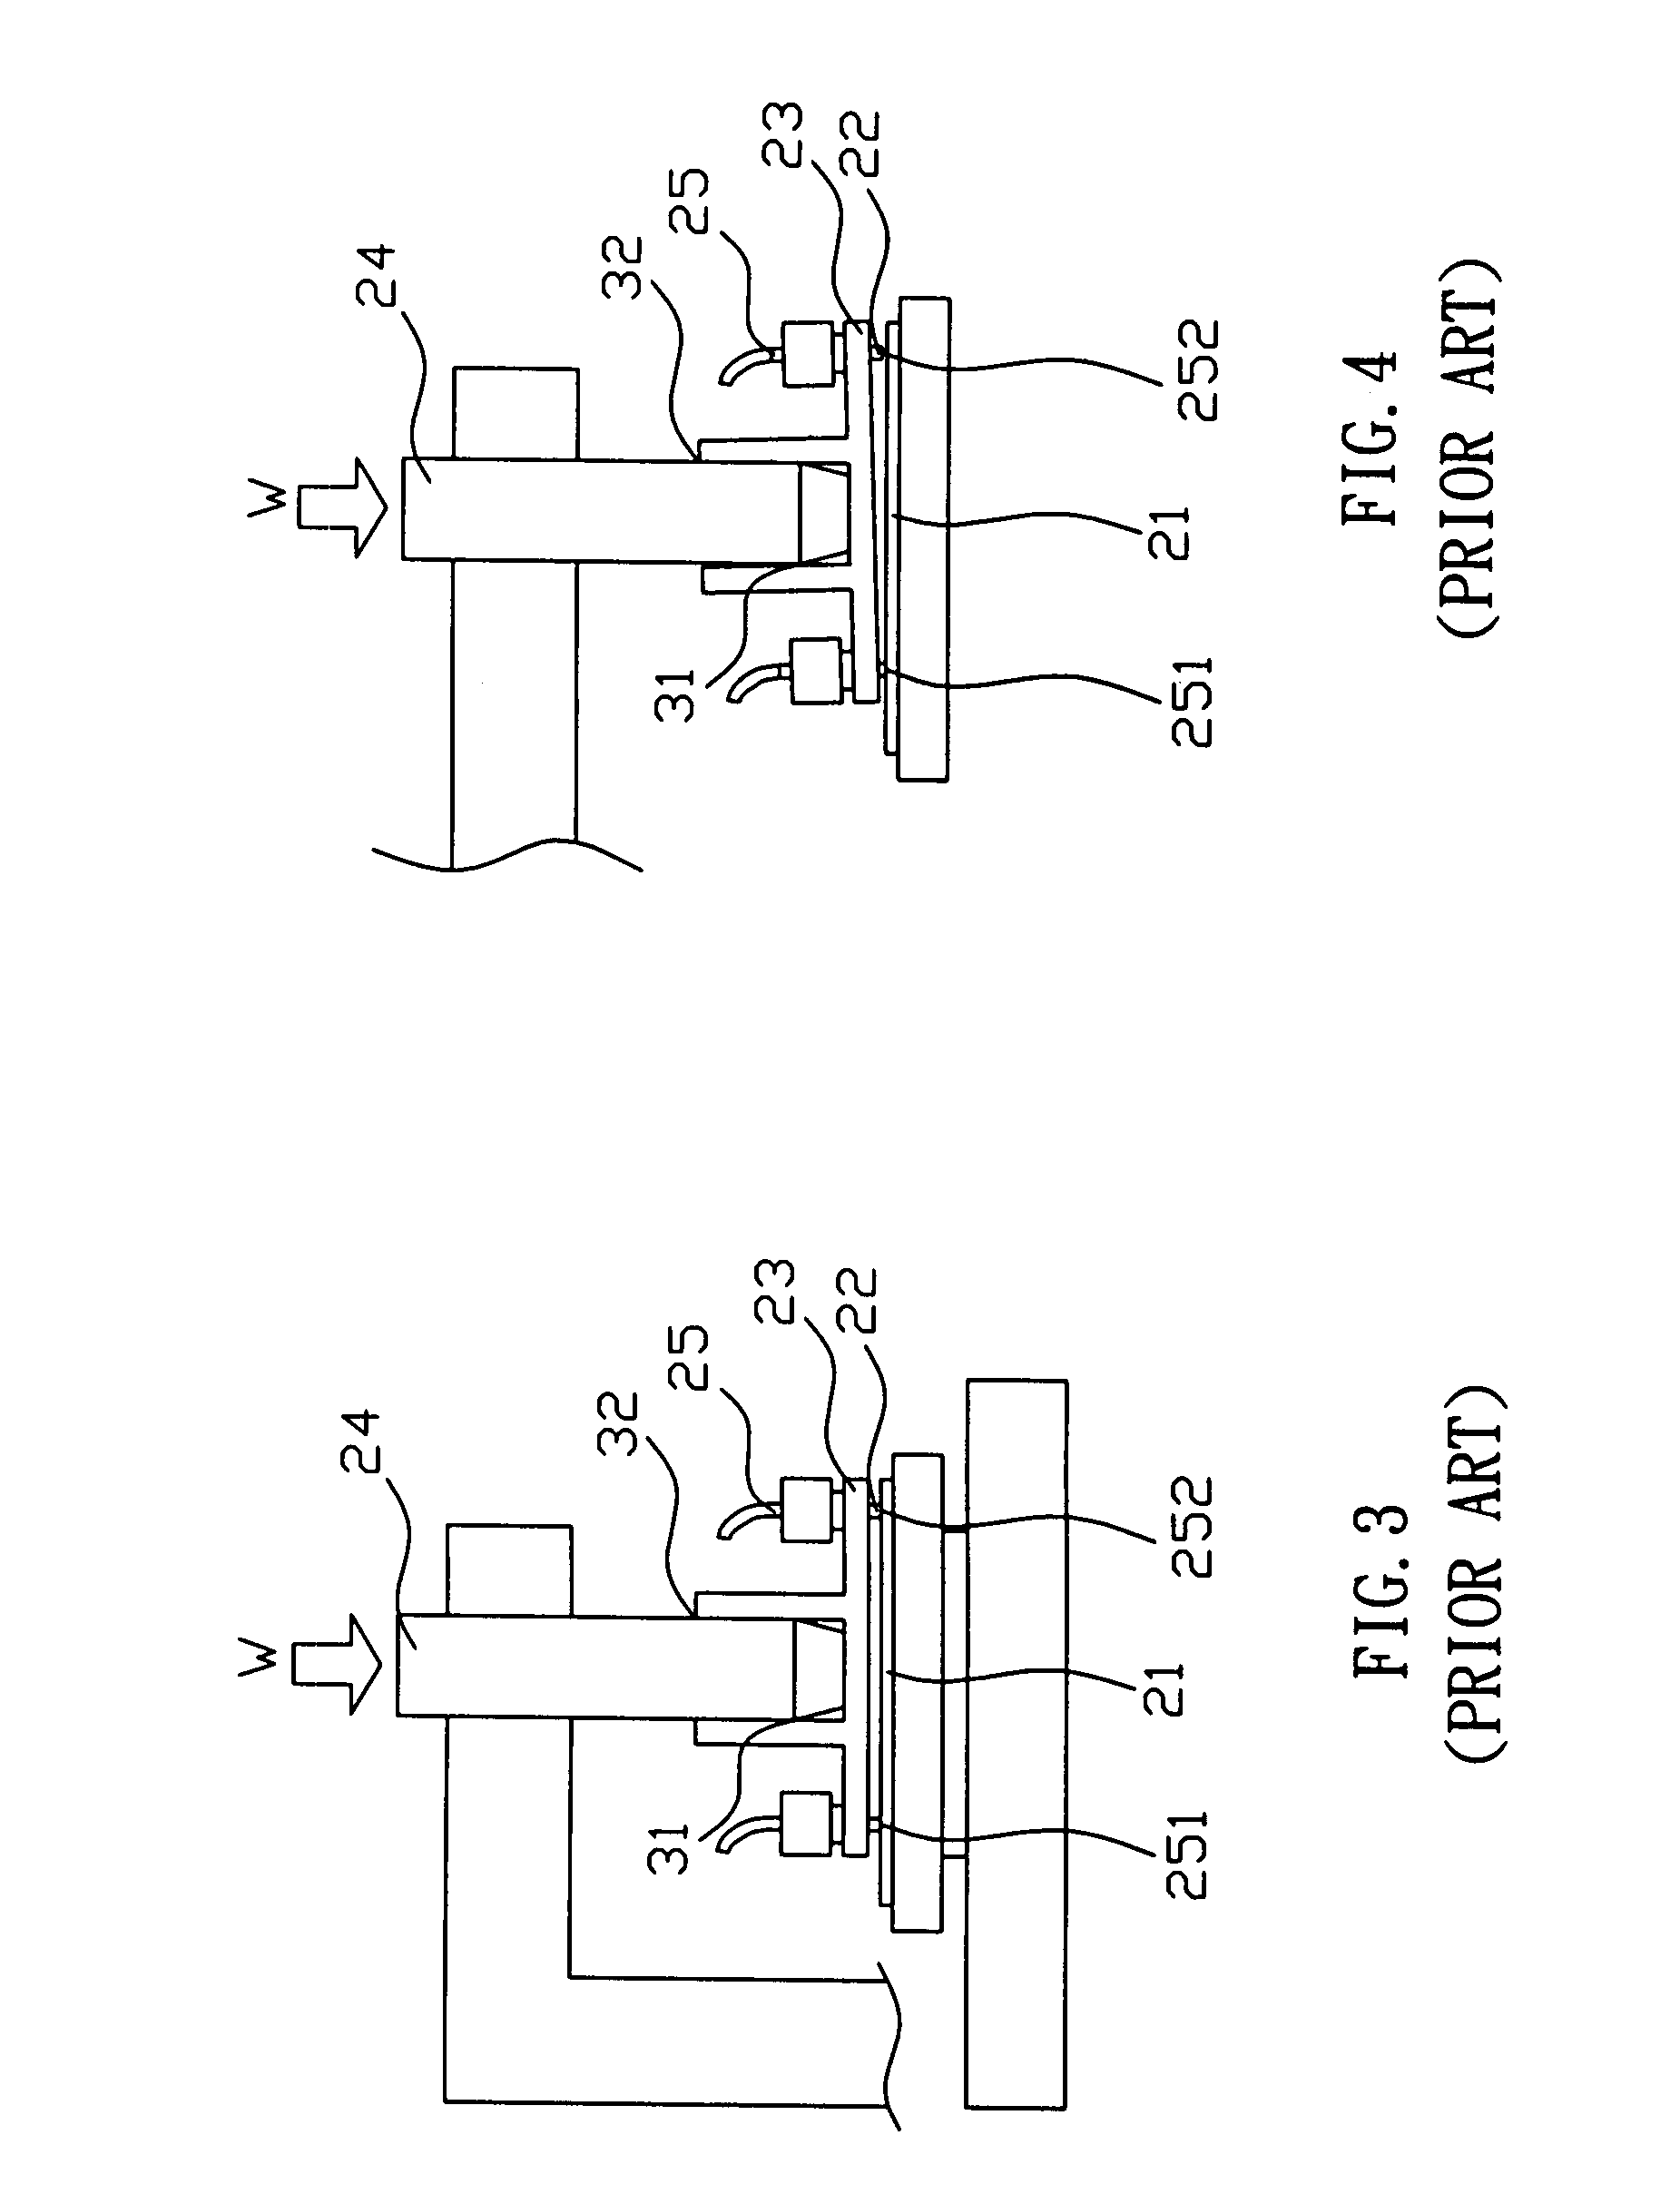 Holder for supporting an end surface of a workpiece during polishing